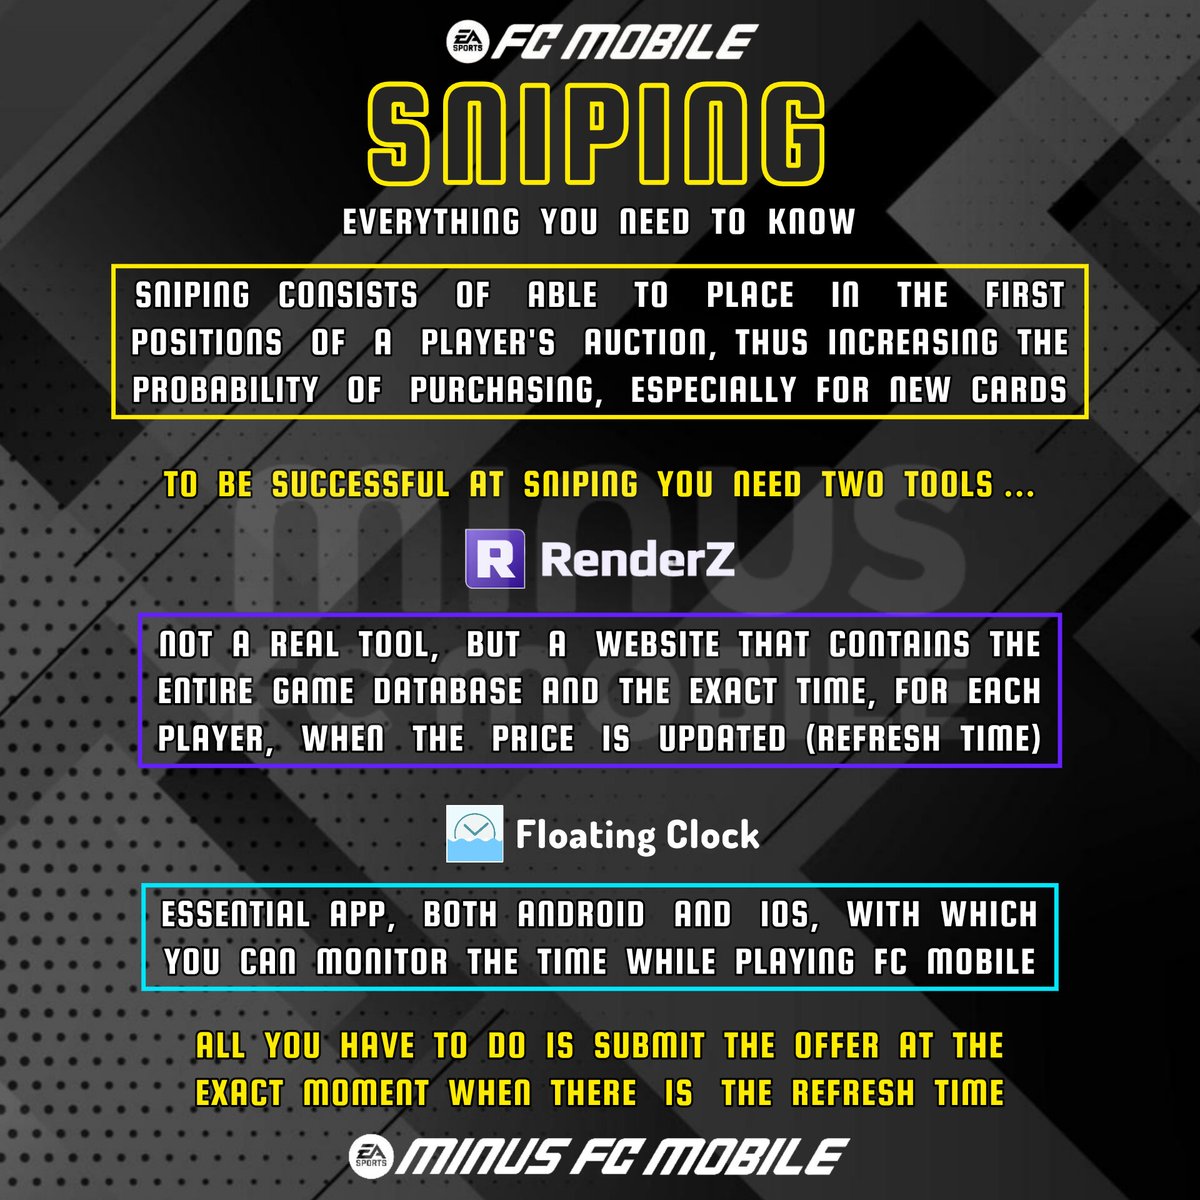 Surely most of you already know Sniping, but if anyone still doesn't know it, here's a short Guide. This guide will be useful in the next few days for the New Project in collaboration with @azaylfcmobile #FCMobile